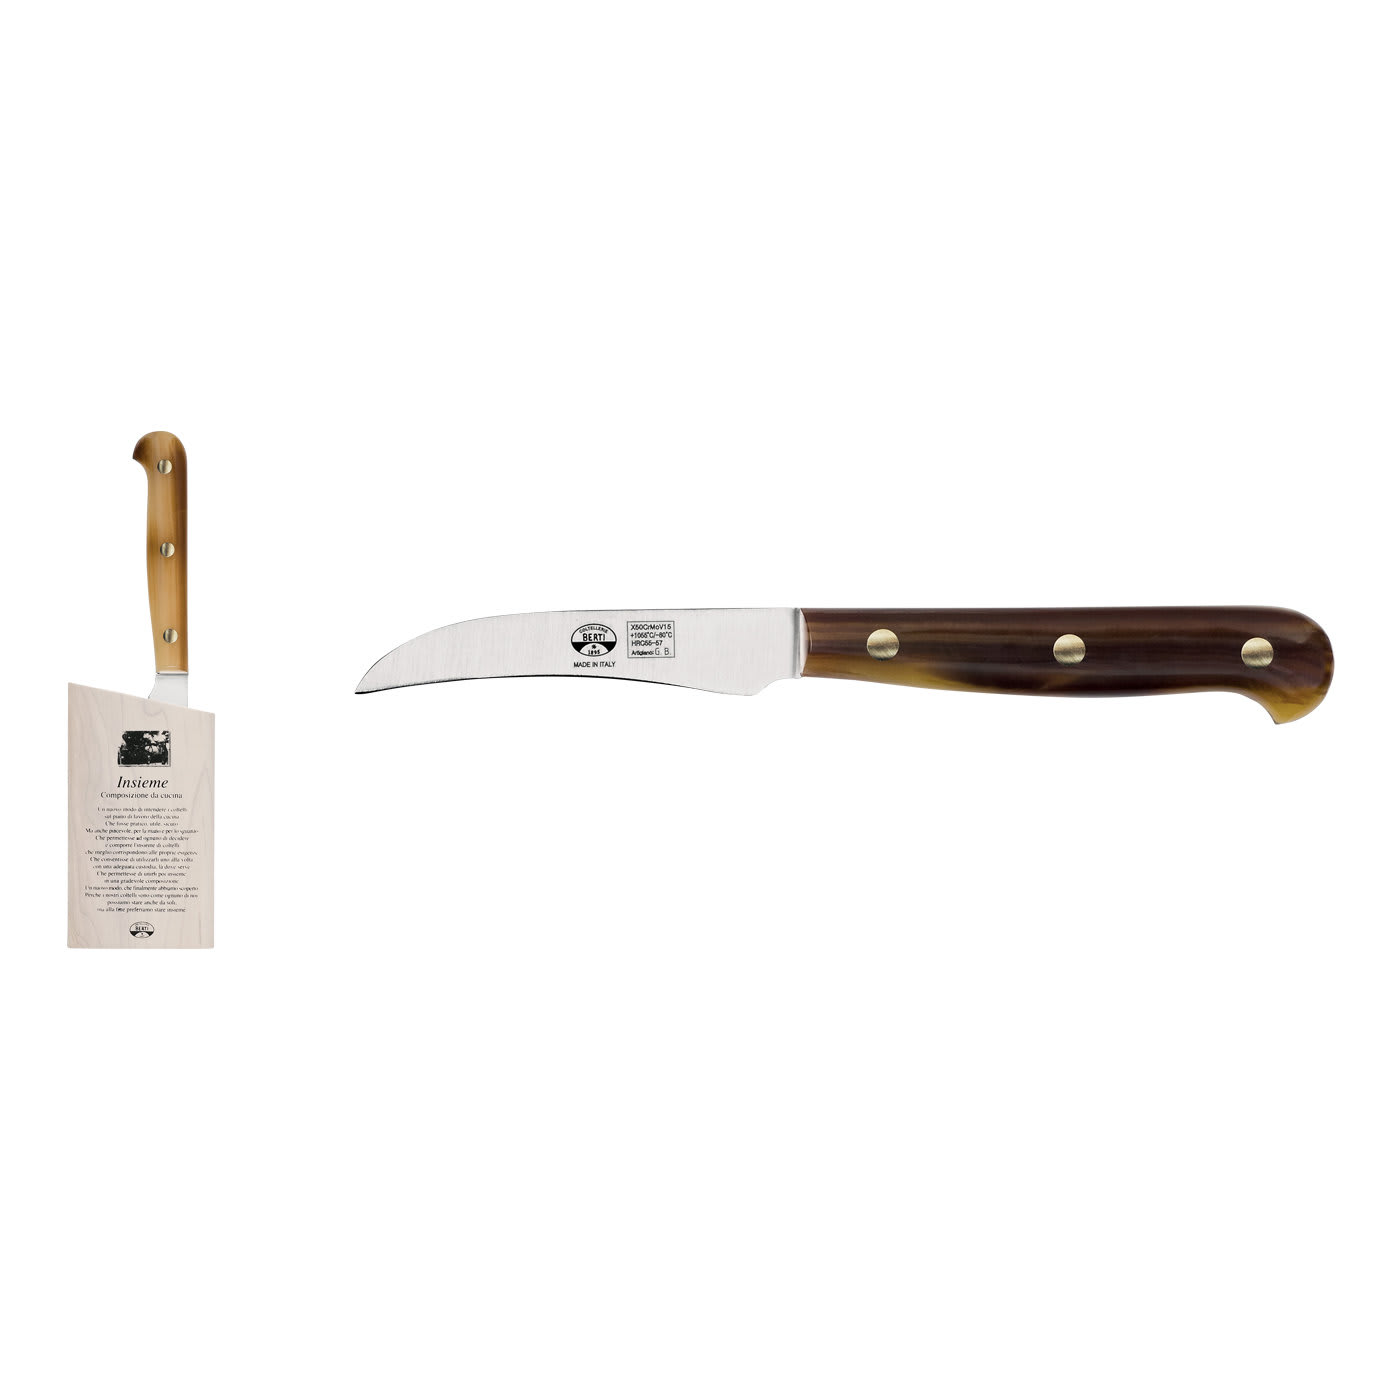 Insieme Set of Block and Slicing Knife with Conrnotech Knife - Coltellerie Berti